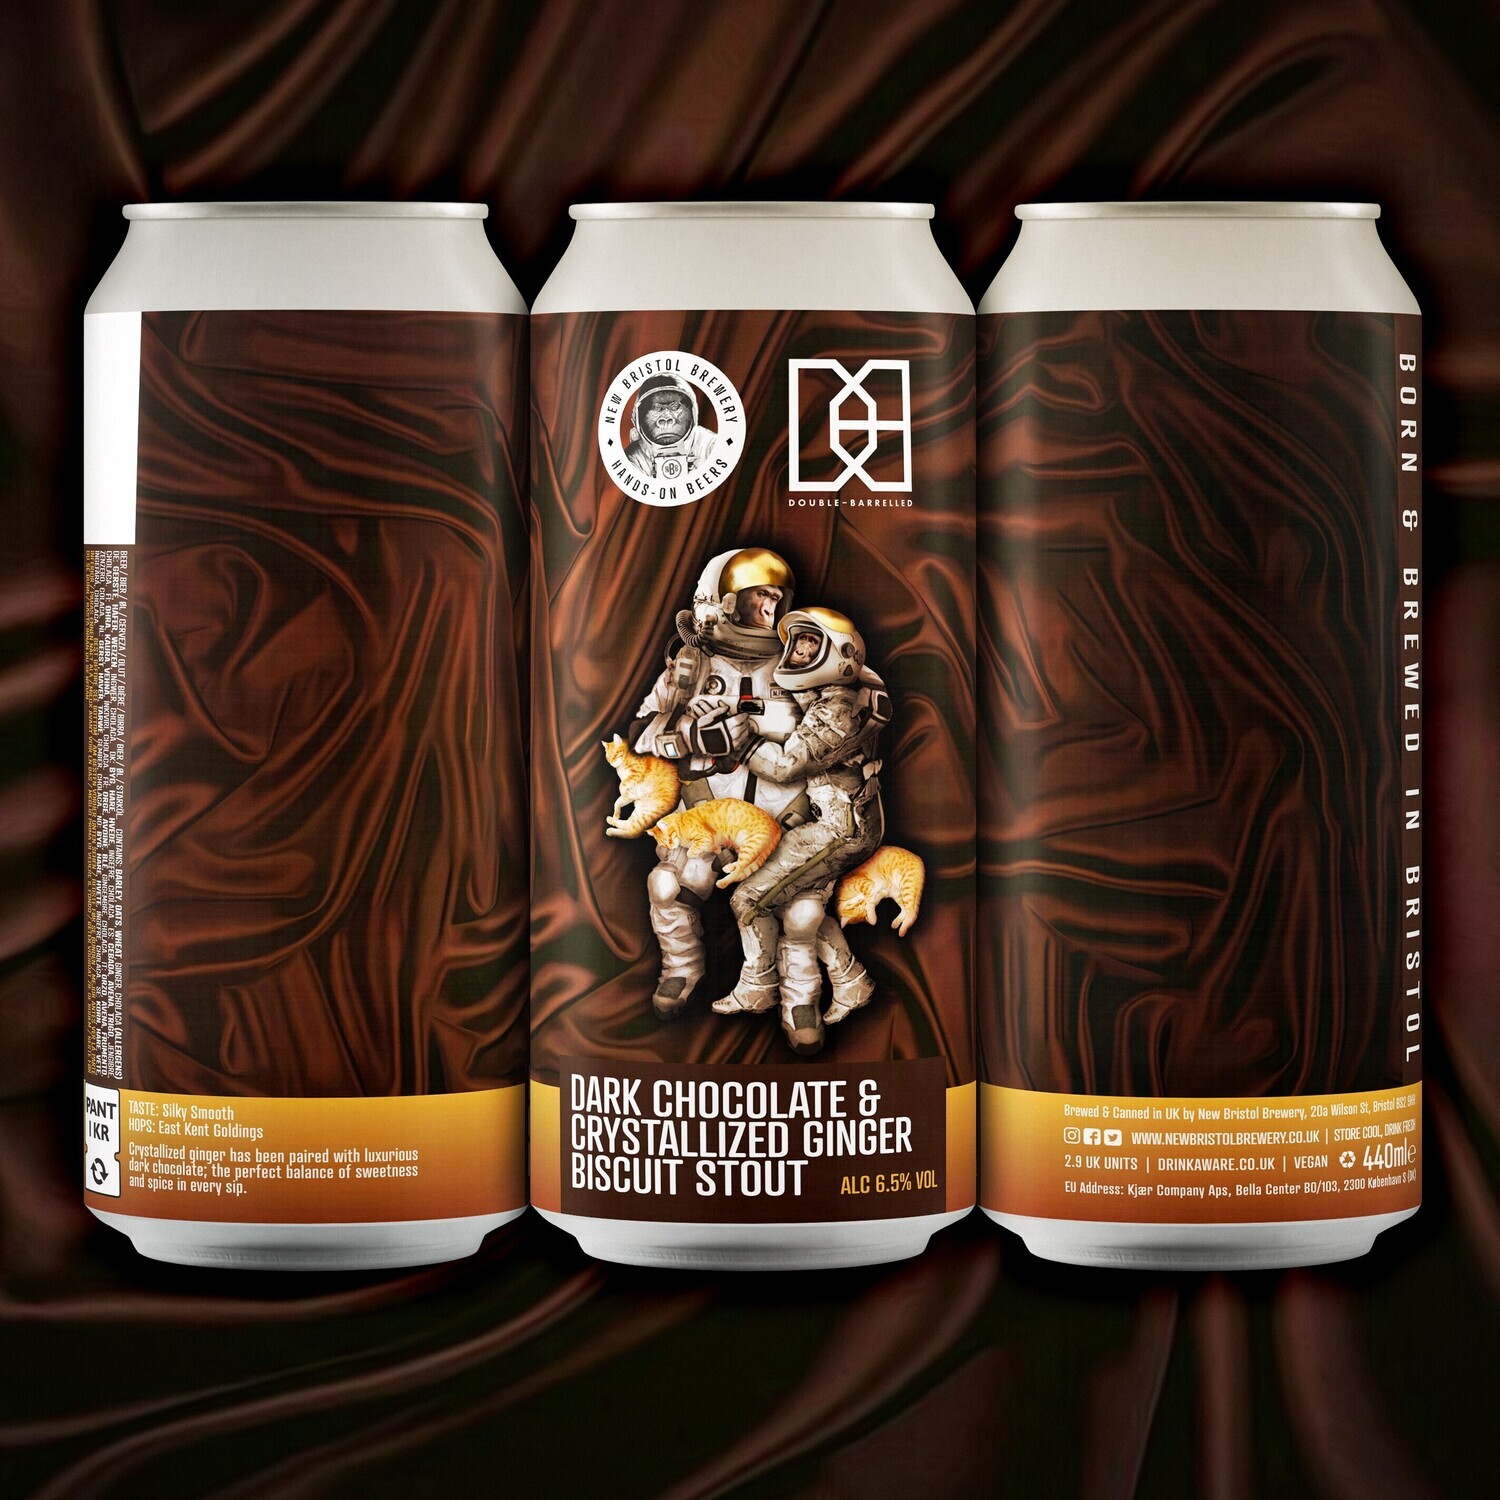 New Bristol x Double Barrelled Dark Chocolate & Crystallized Ginger Biscuit Stout